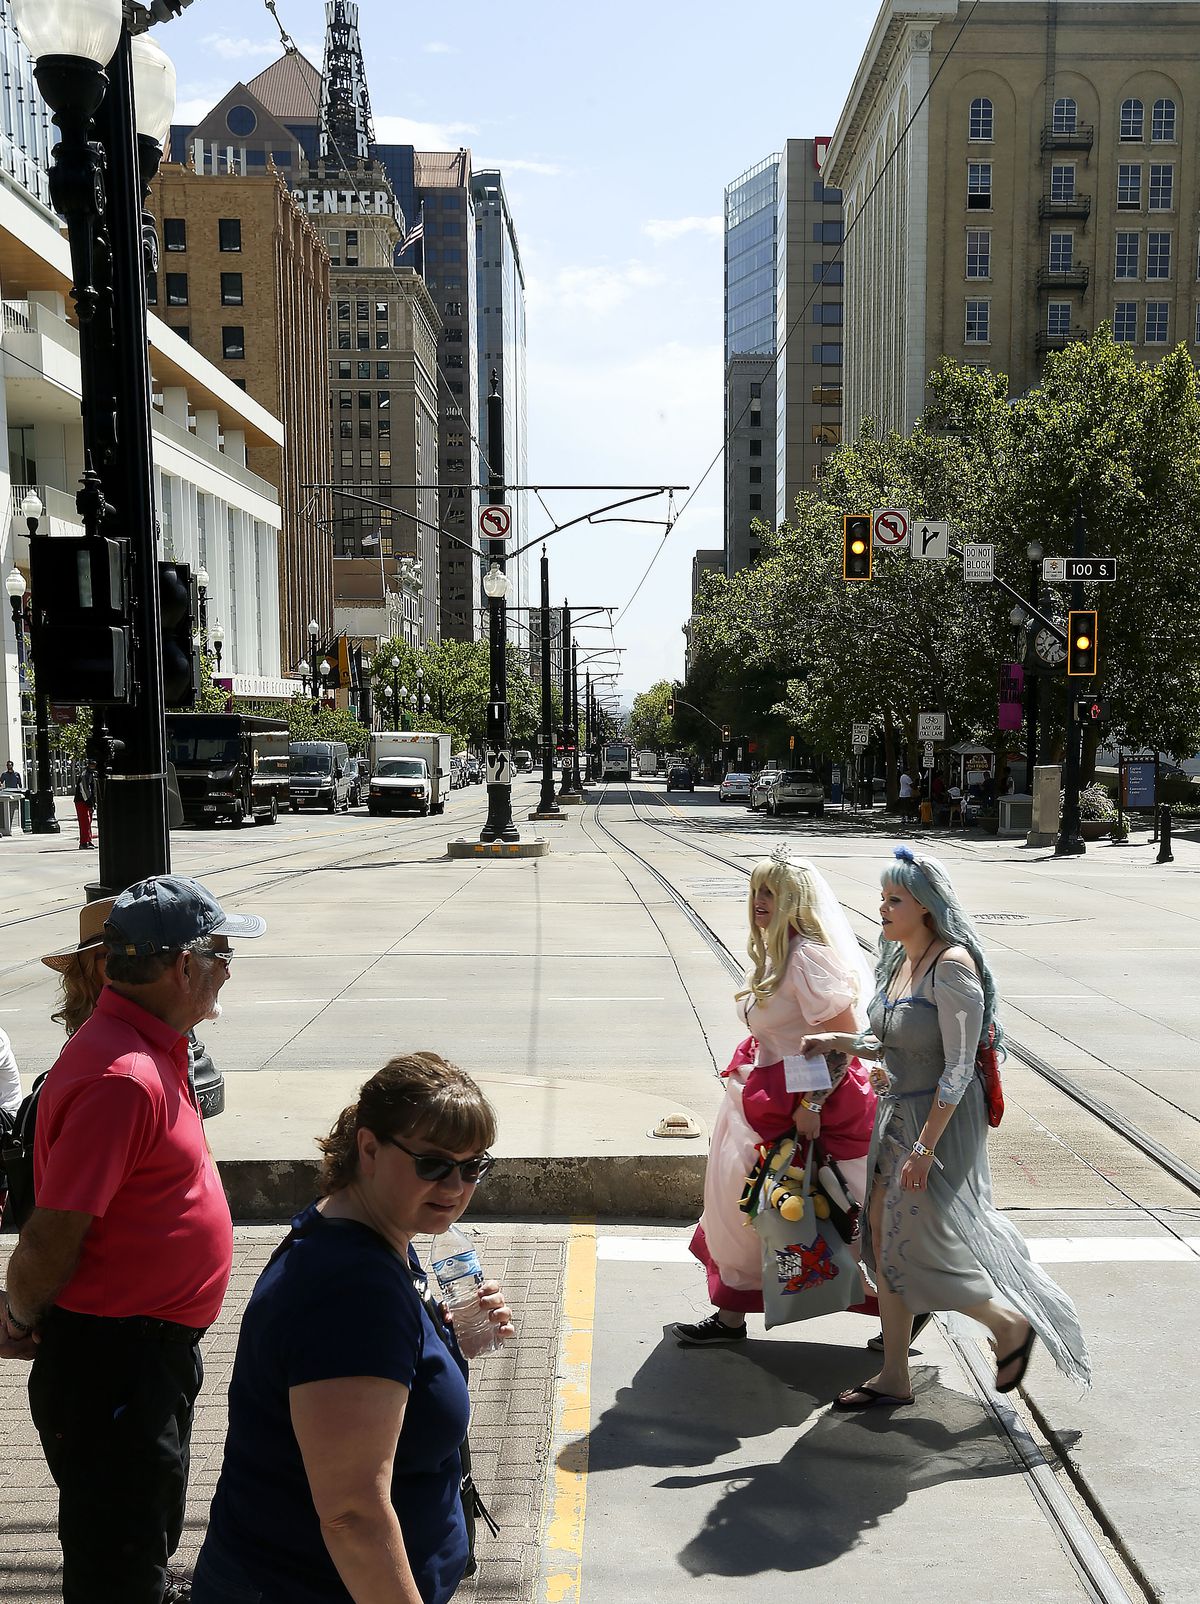 Participants of the FanX Salt Lake Comic Convention being held the Salt Palace Convention Center walk across Main Street in Salt Lake City on Thursday, Sept. 5, 2019. This weekend the city will play host to the Greek Festival, FanX, the Utah State Fair and the Vans Park Series World Championships.